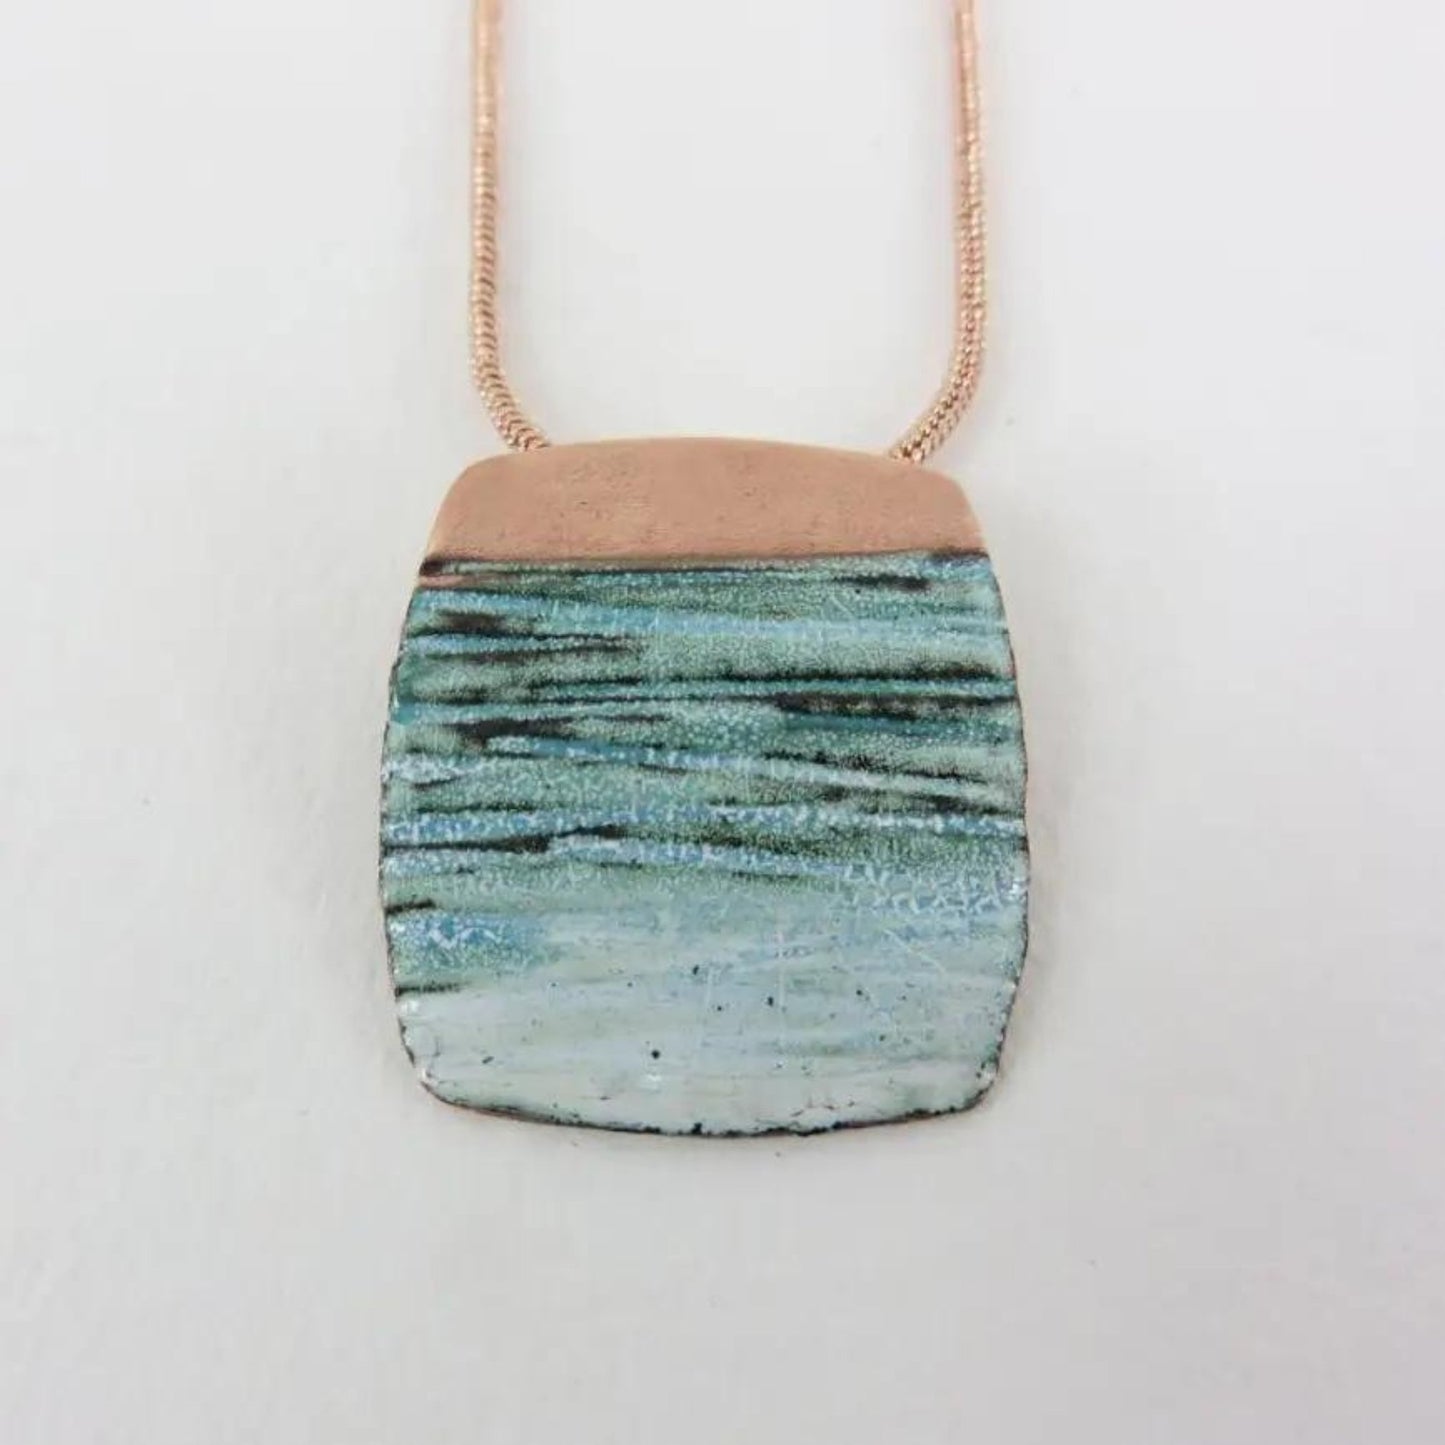 Copper and Enamel Textured Pendant in Teal and White - The Little Jewellery Company